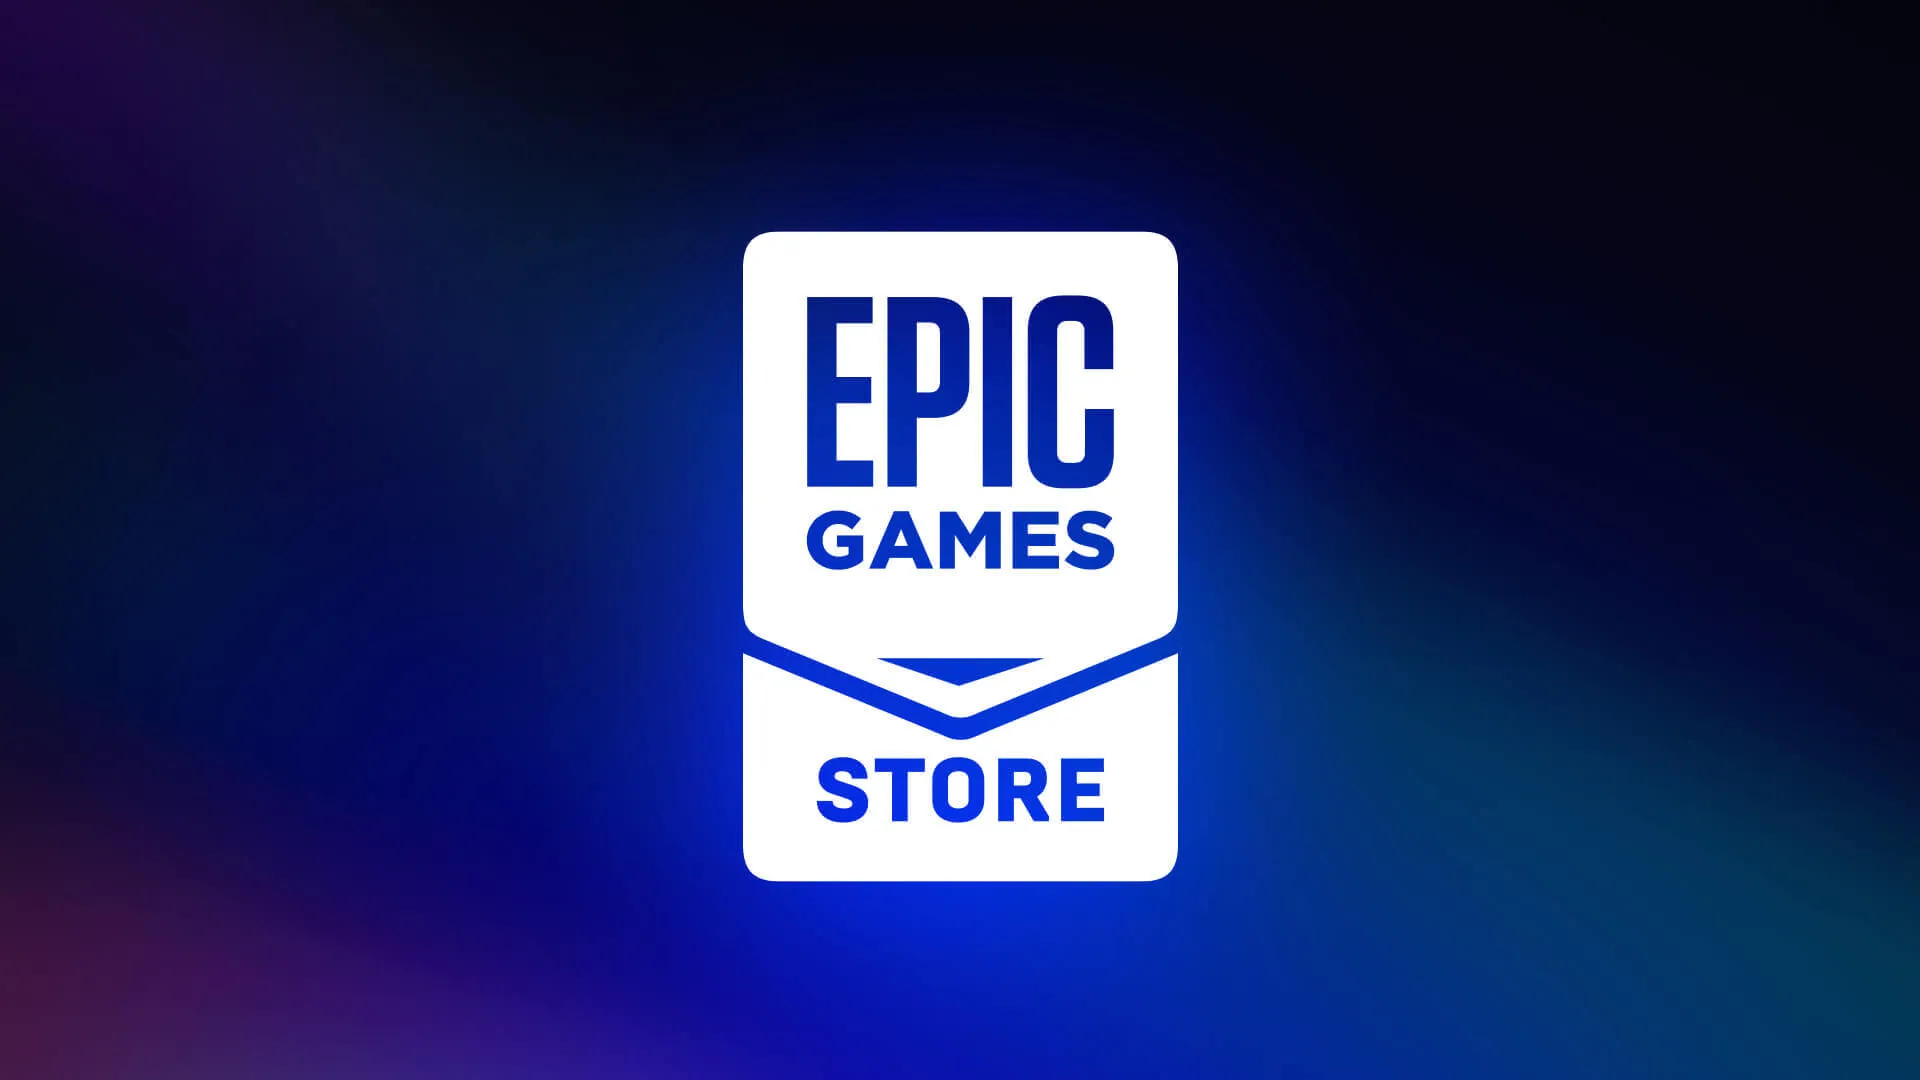 Epic Games Store offers 100% revenue share to developers for new releases in exclusive deal